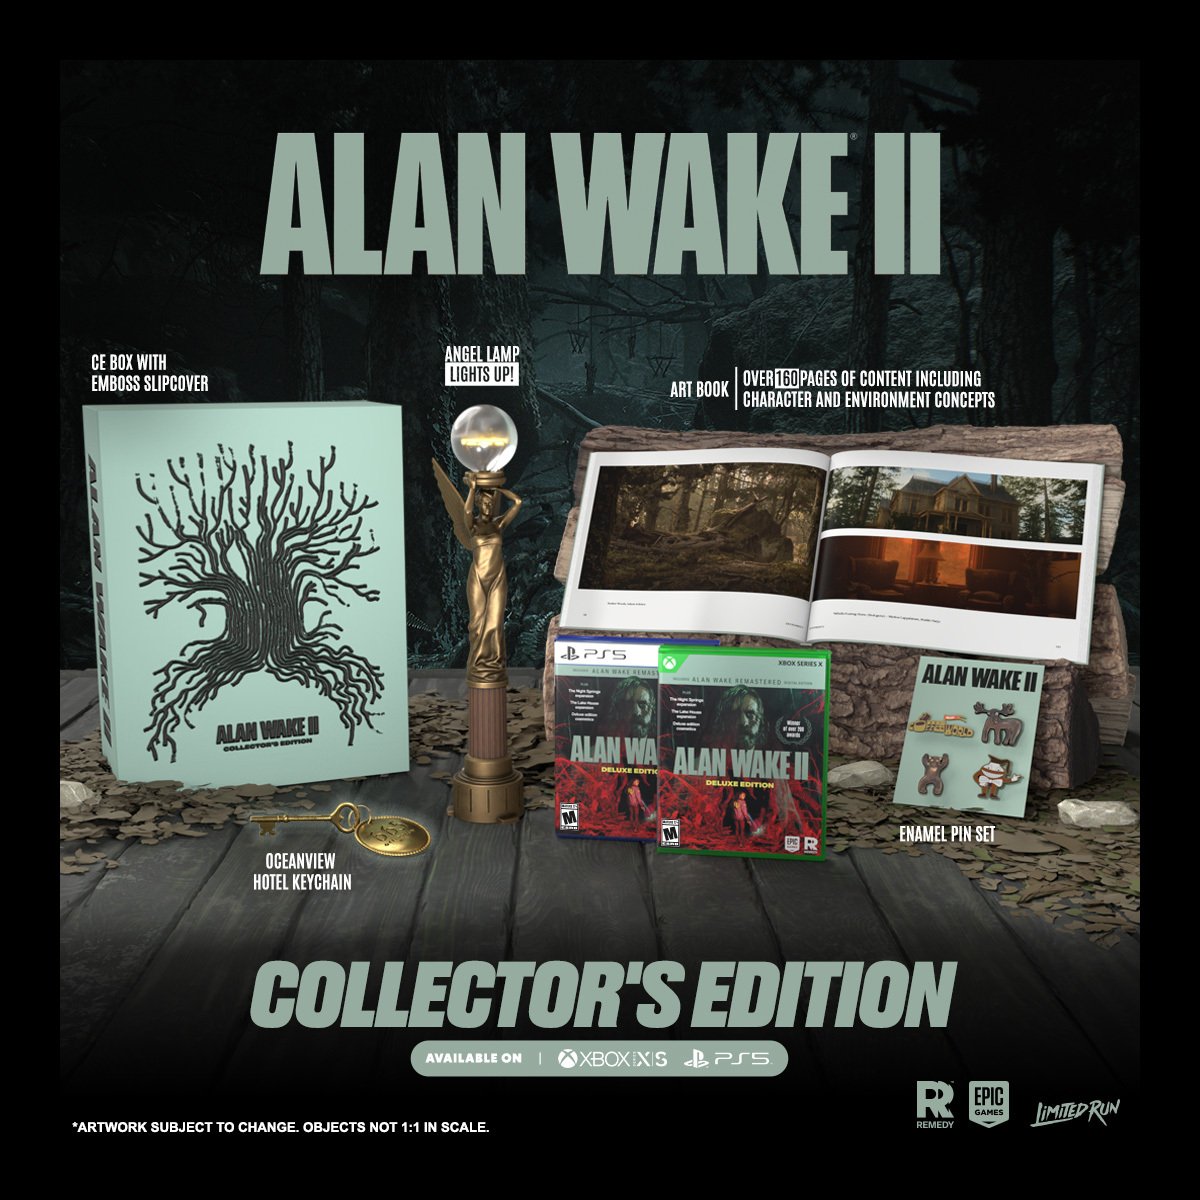 a look at the Alan Wake 2 physical alanwake.com/story/lets-get…

Deluxe: 
Expansion Pass: Dive deeper into the darkness with two expansions, Night Springs and The Lake House.
Alan Wake Remastered: A digital edition of the critically acclaimed original game.
Digital Deluxe In-Game